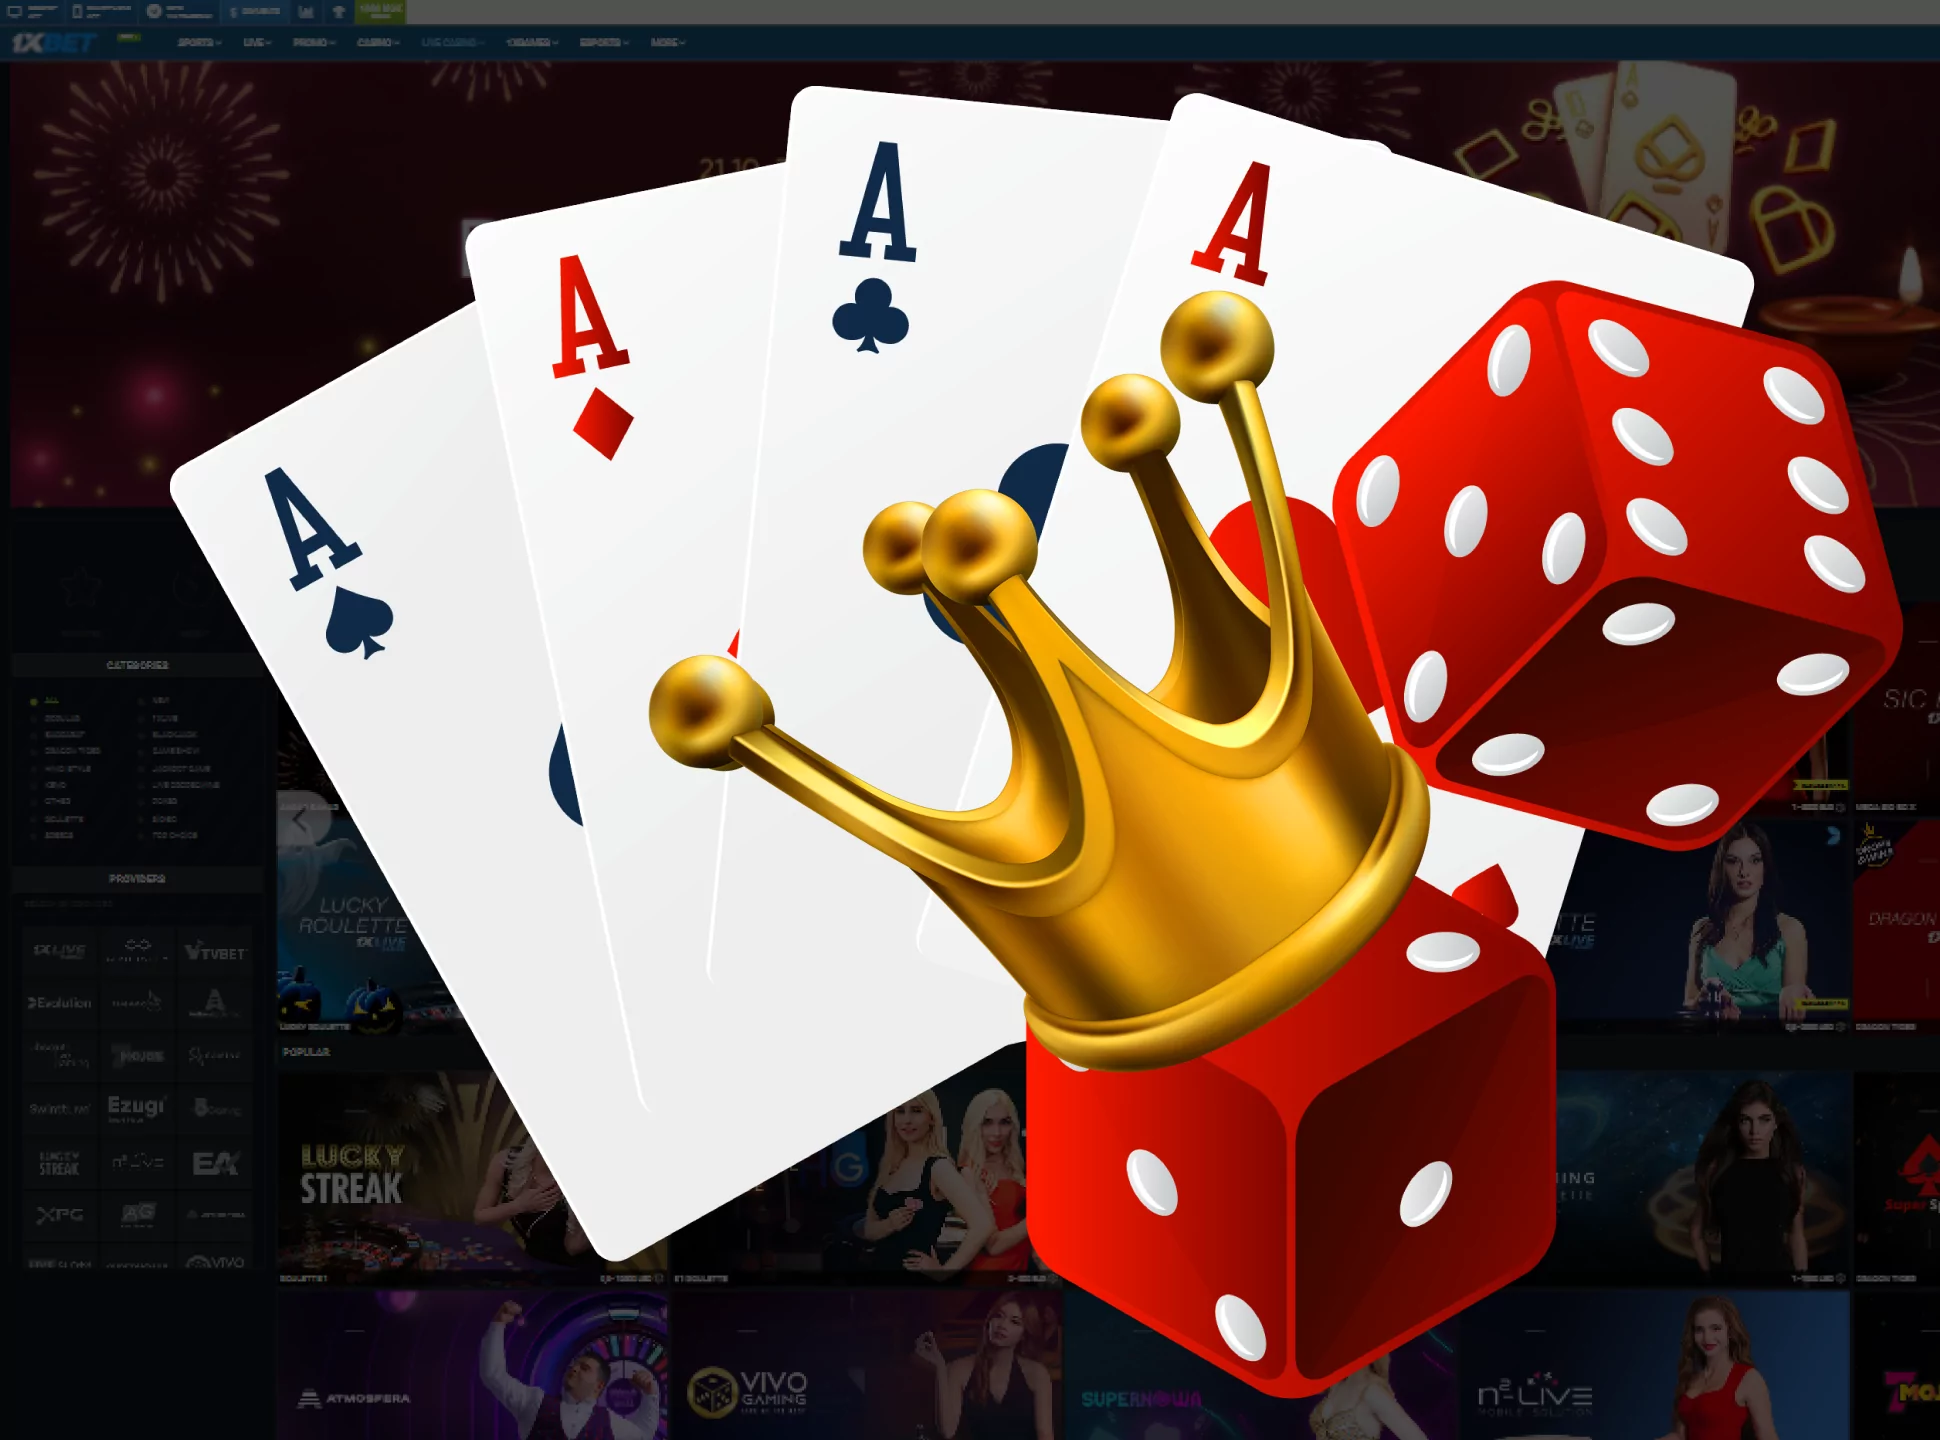 Play this popular game in the live section of an online casino.